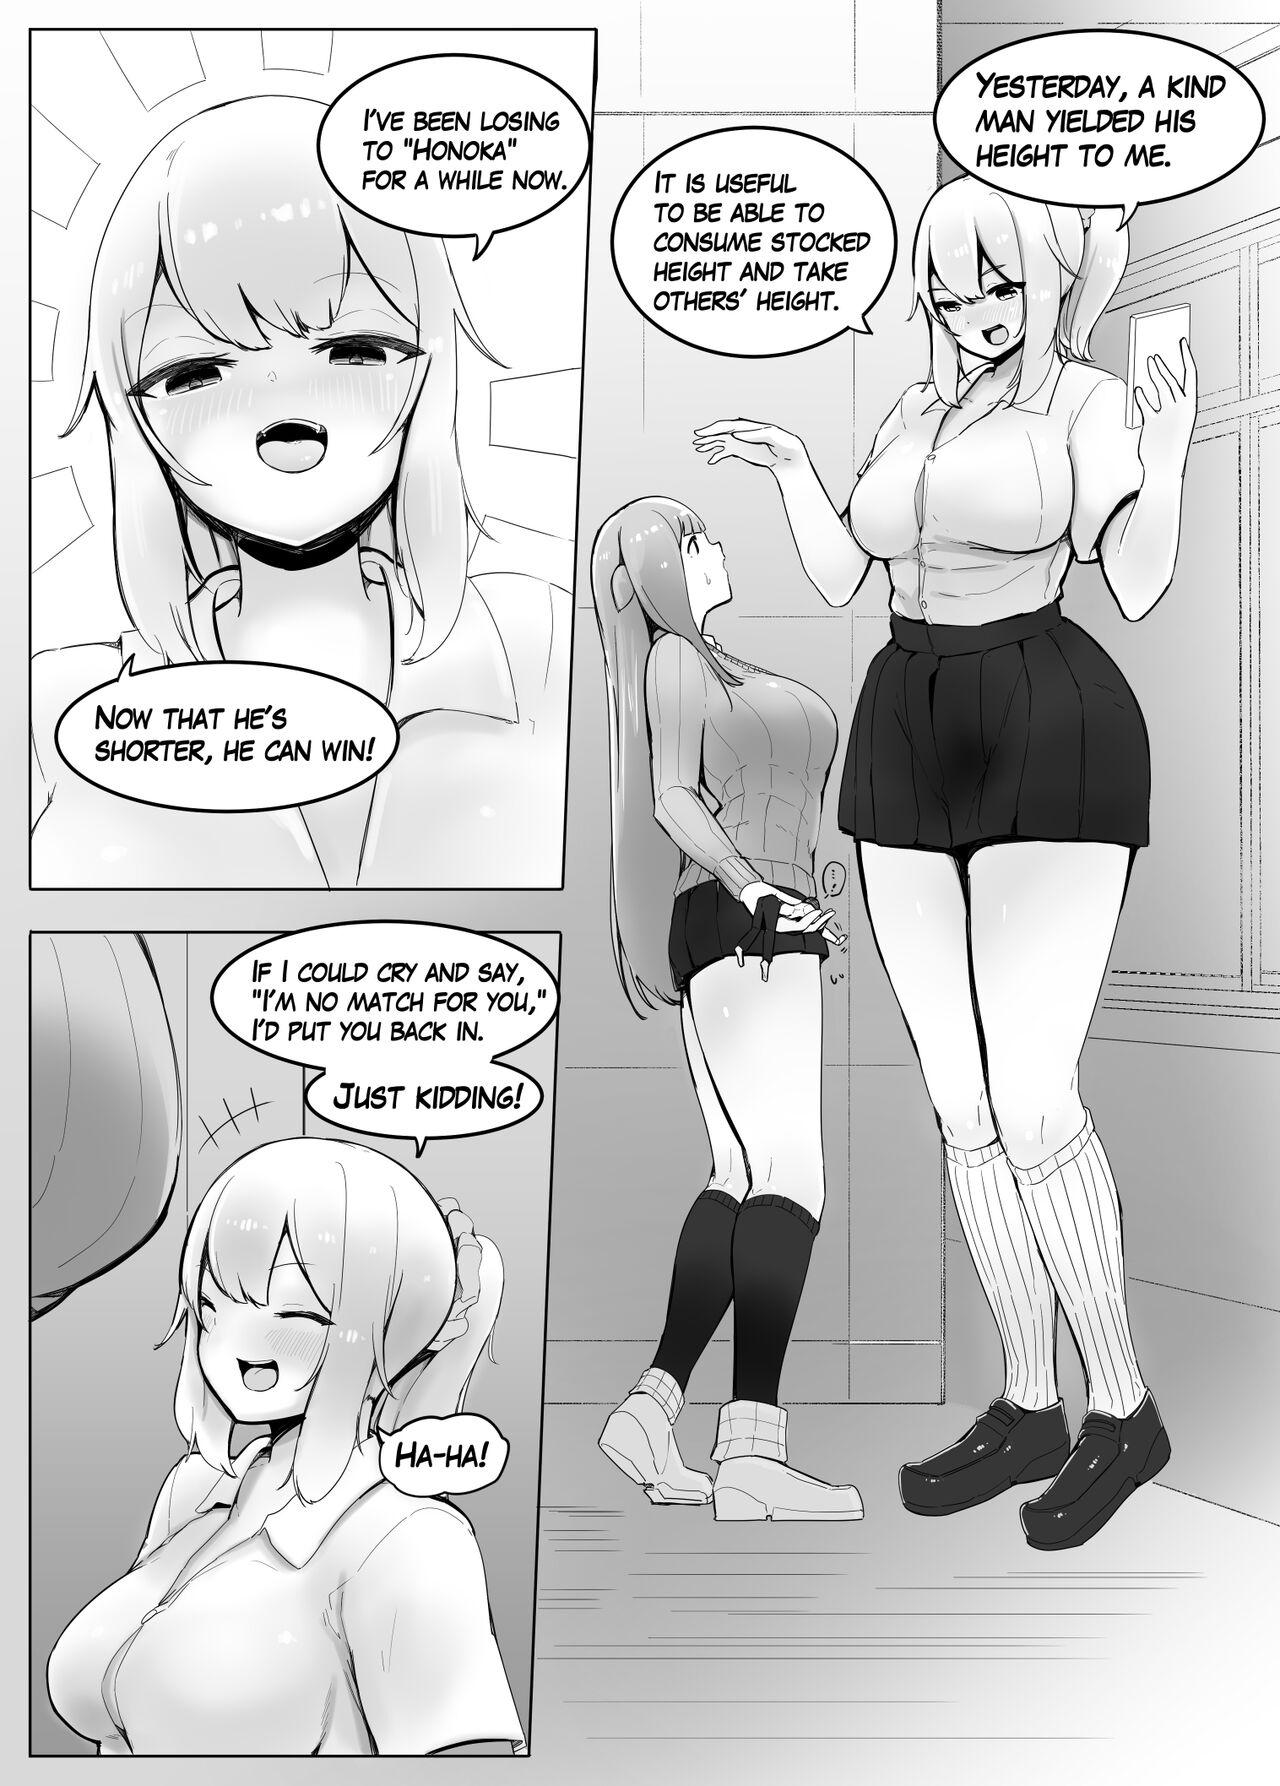 Sentando The Girl Takes My Height. 2 Africa - Page 2